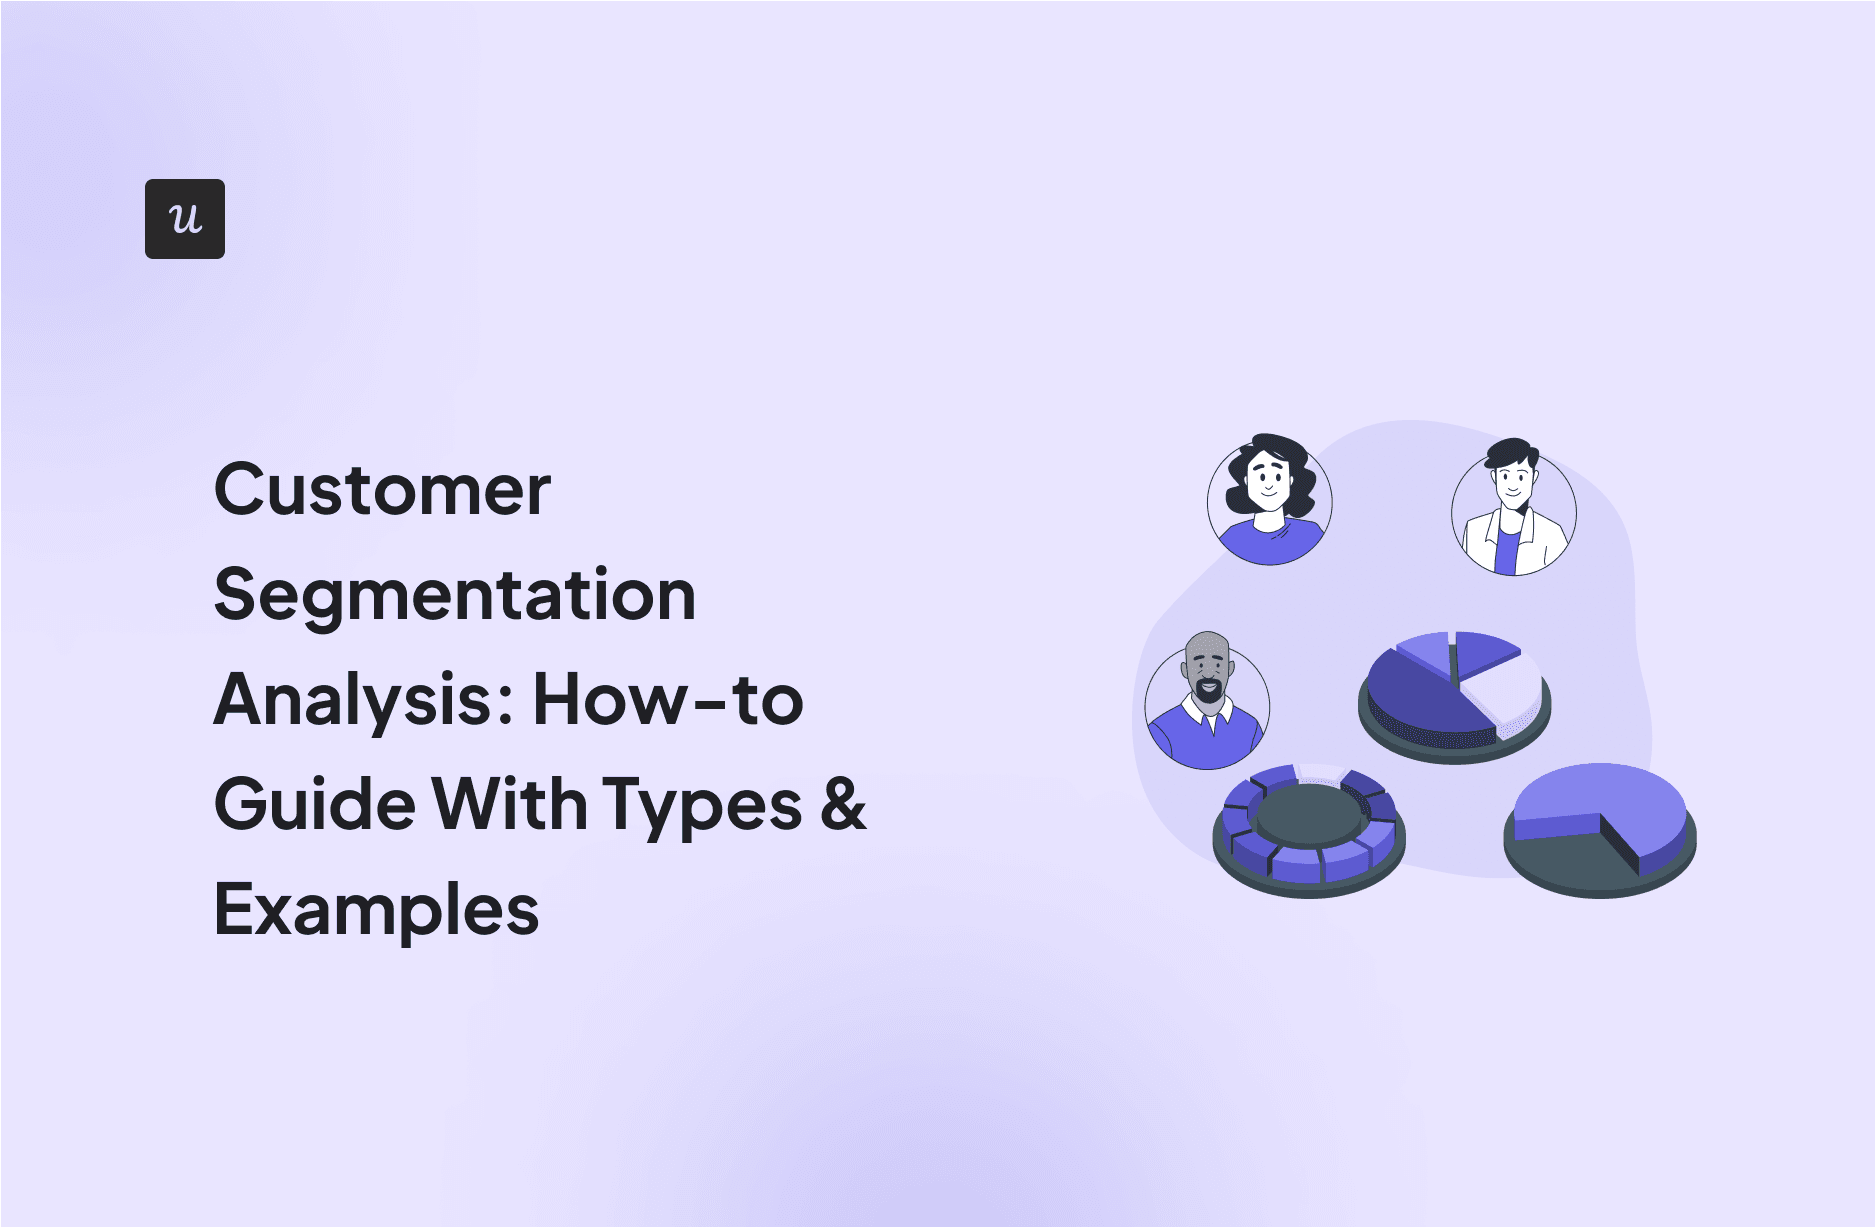 Customer Segmentation Analysis: How-to Guide With Types & Examples cover